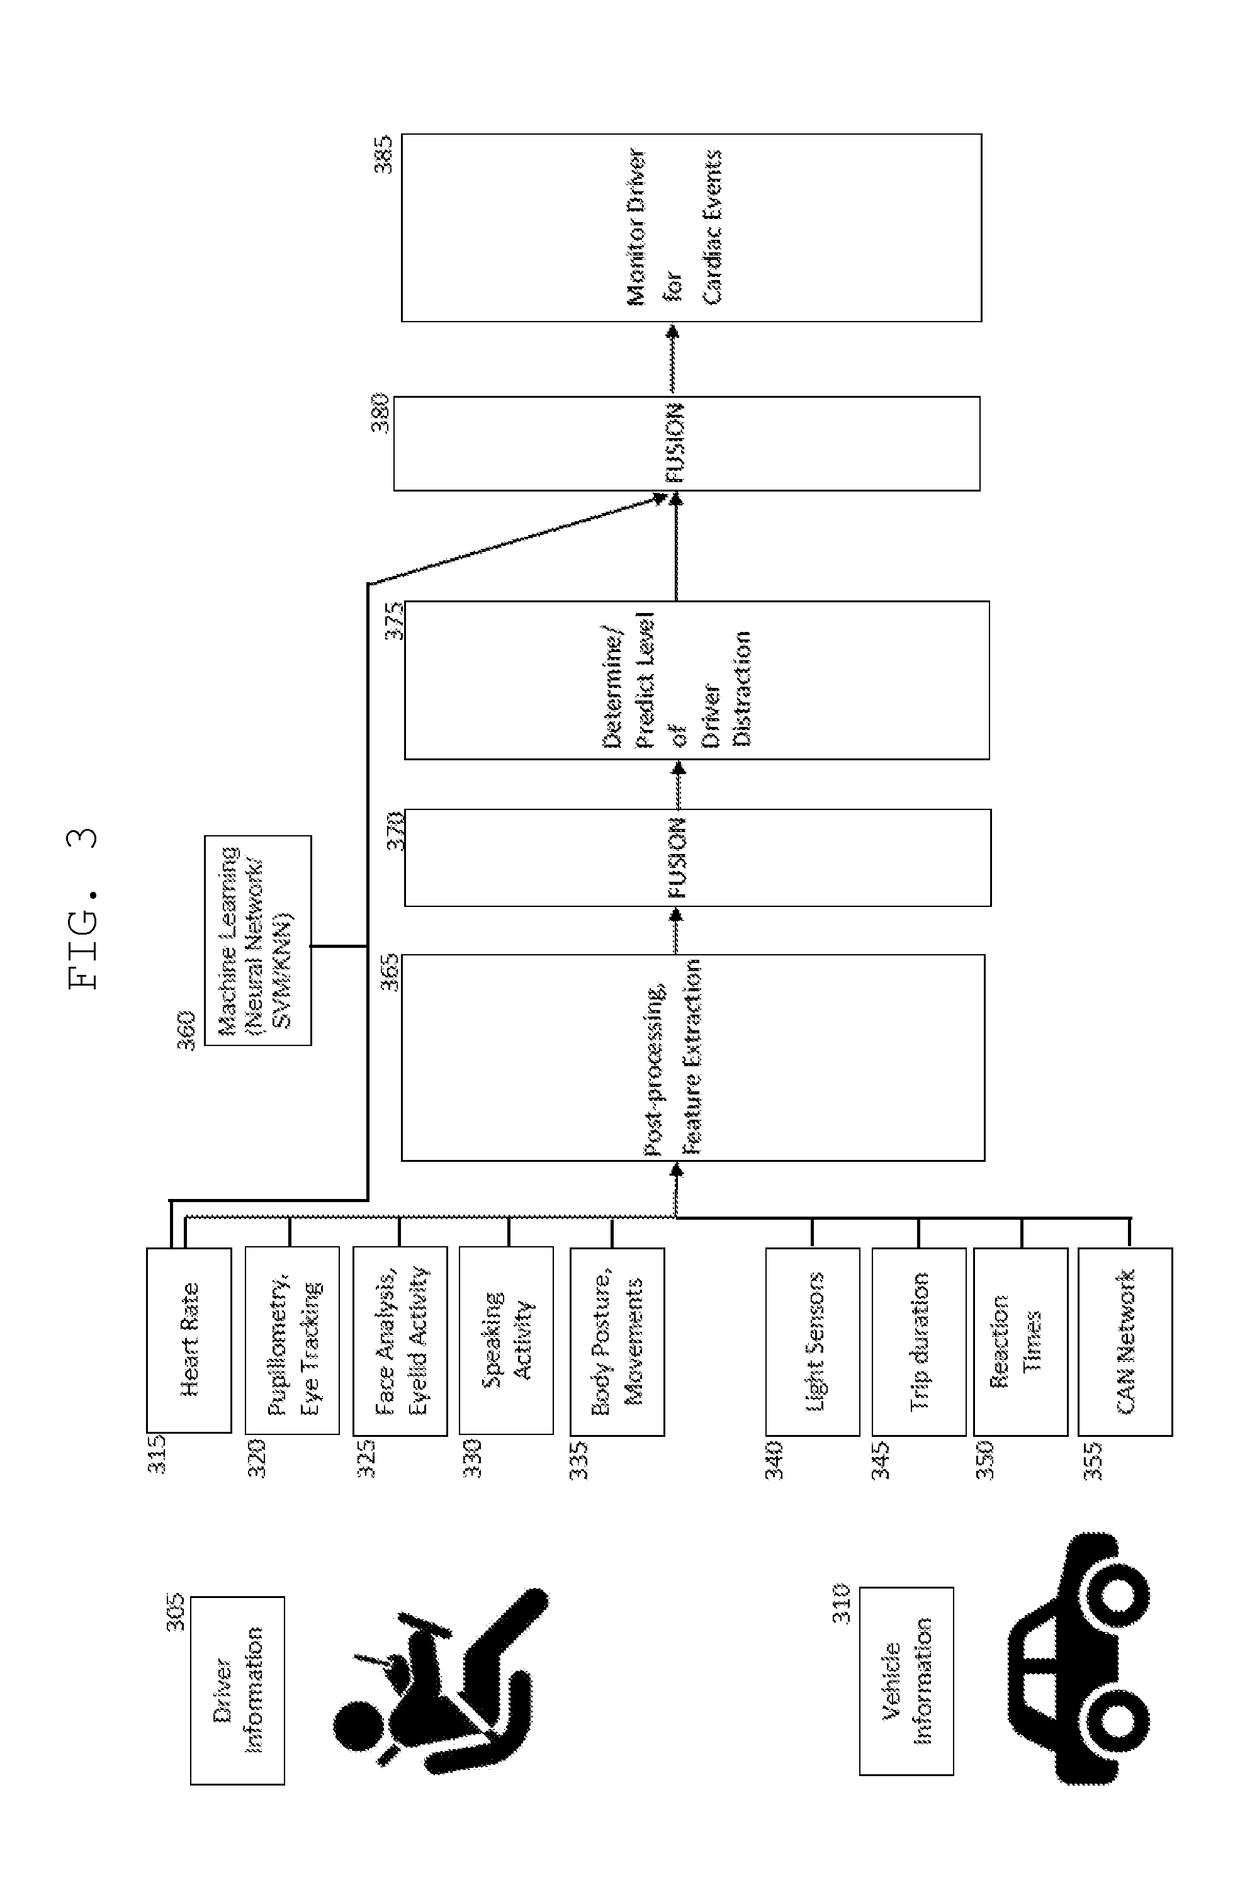 Pupillometry and sensor fusion for monitoring and predicting a vehicle operator's condition